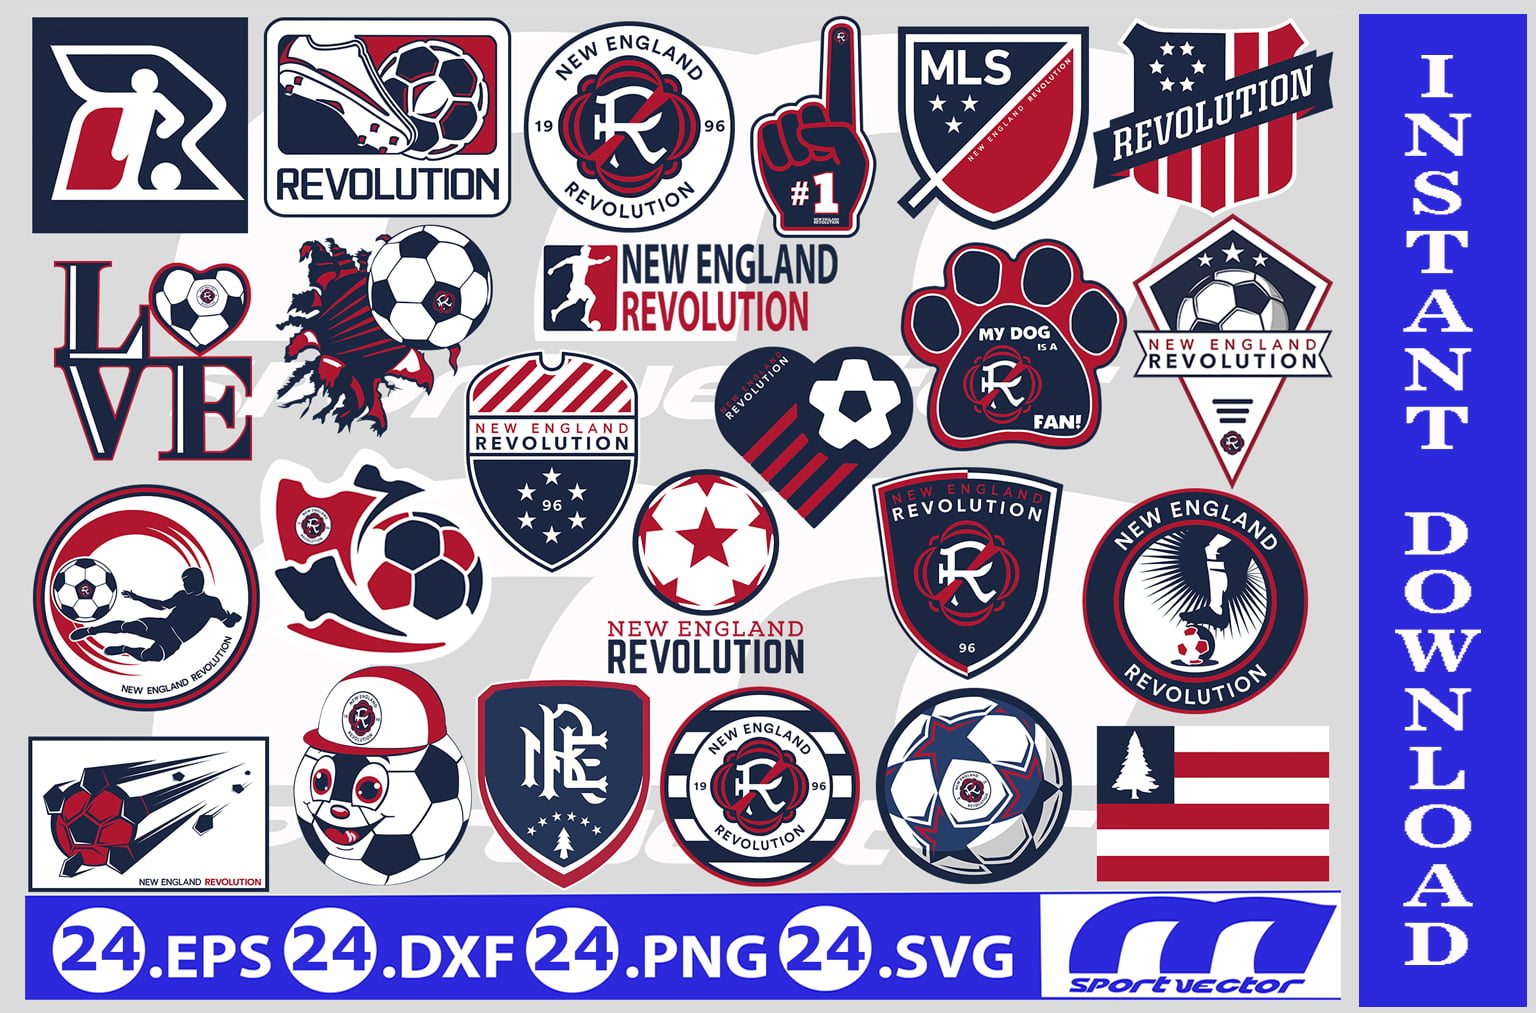 New England Revolution fan page